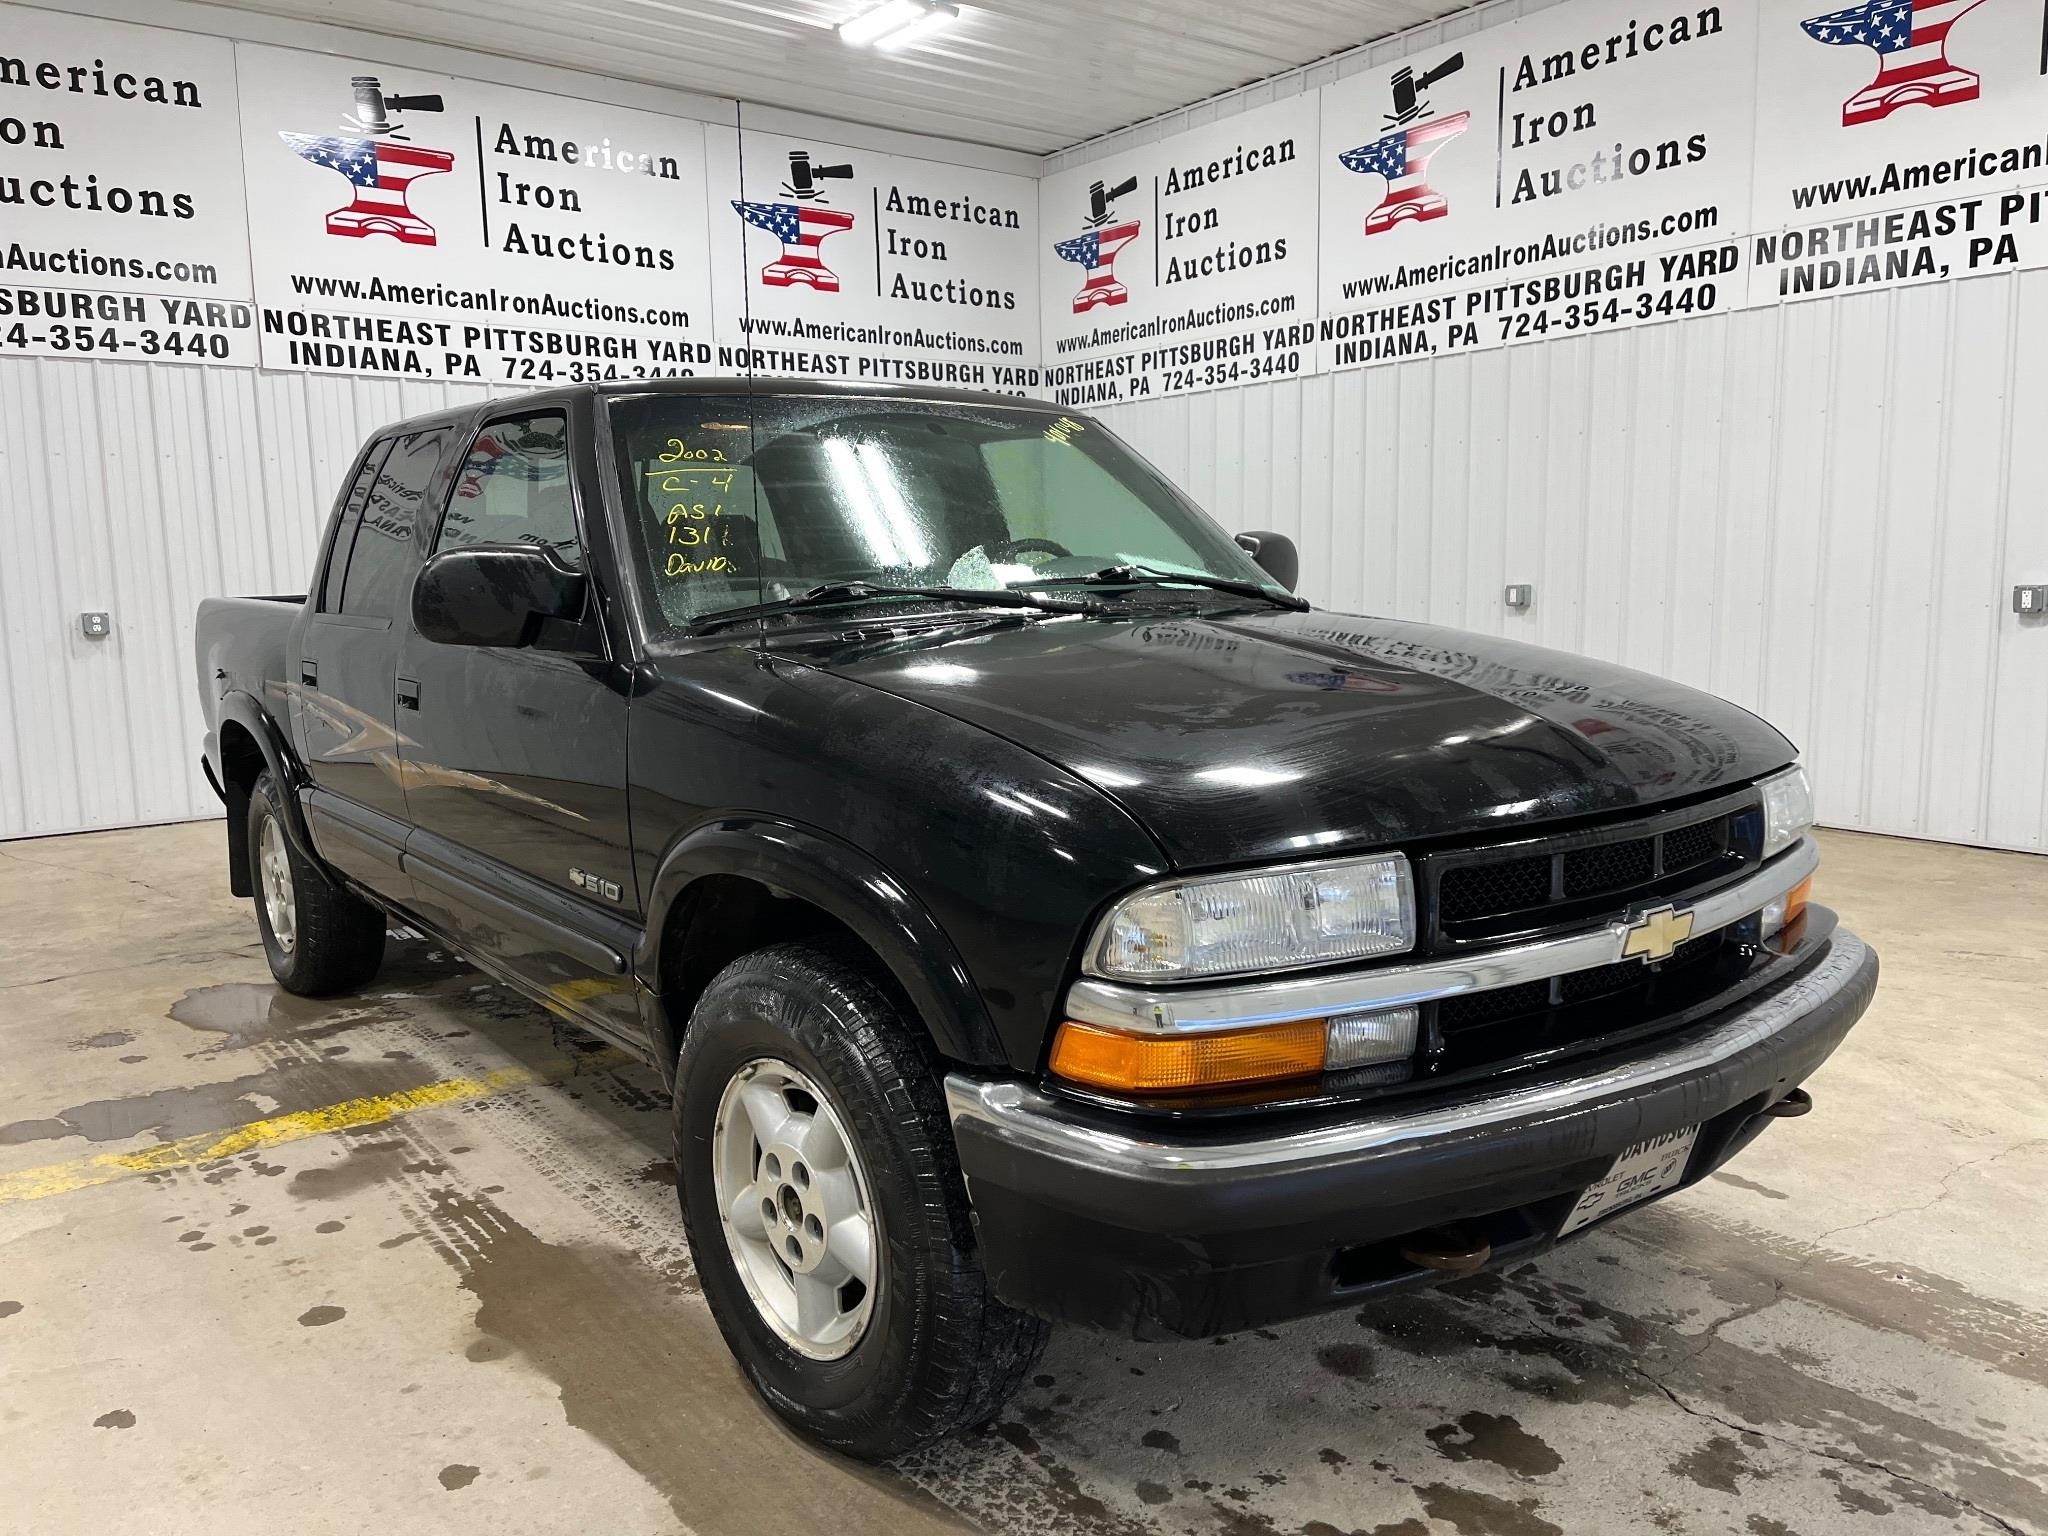 2002 Chevrolet S-10 Truck- Titled -NO RESERVE